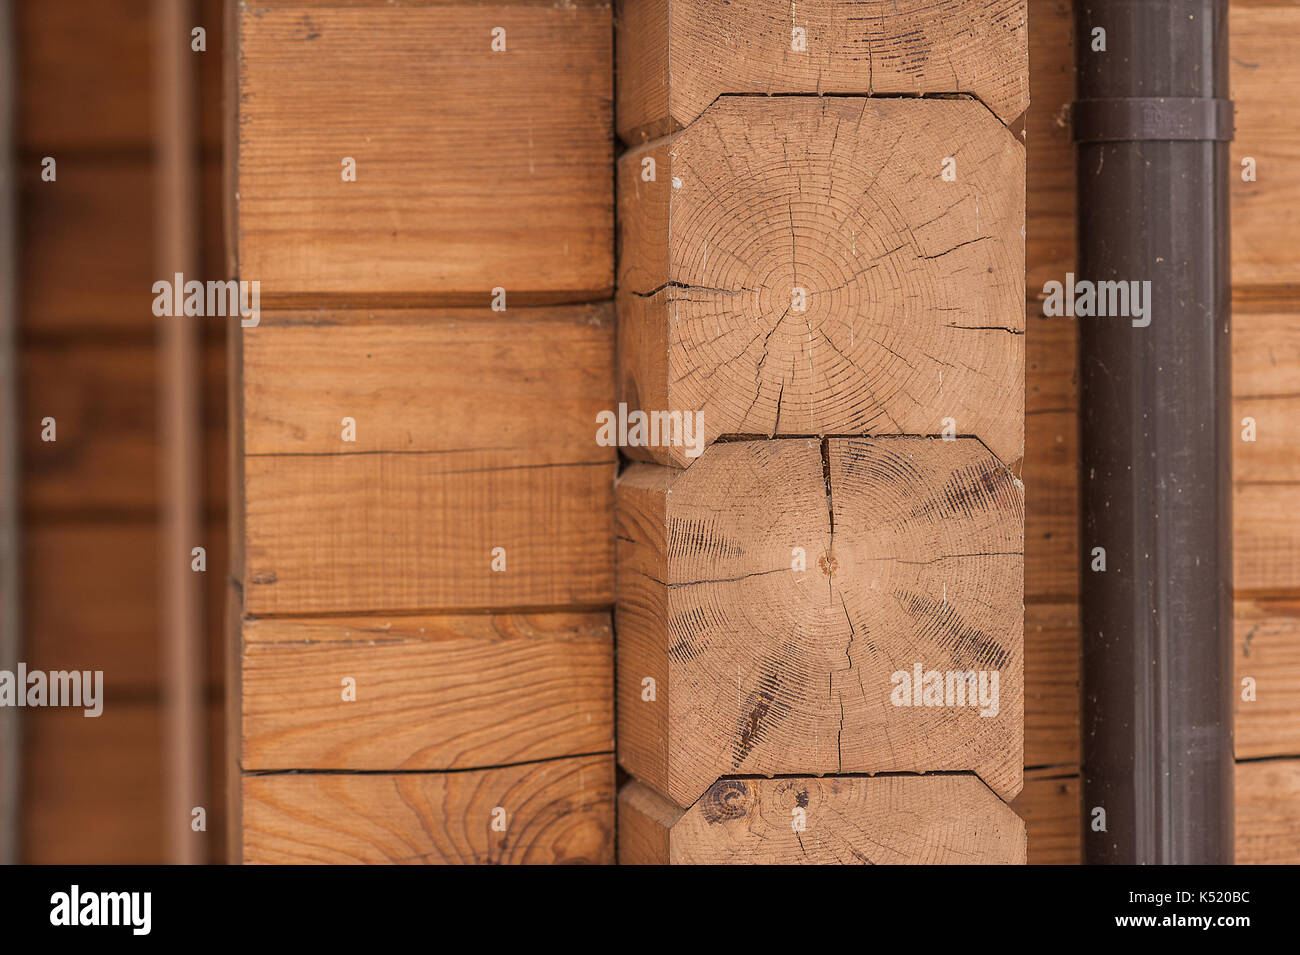 Texture - wooden boards brown color. Texture of a wooden wall from a bar. at intersection another view close up Stock Photo